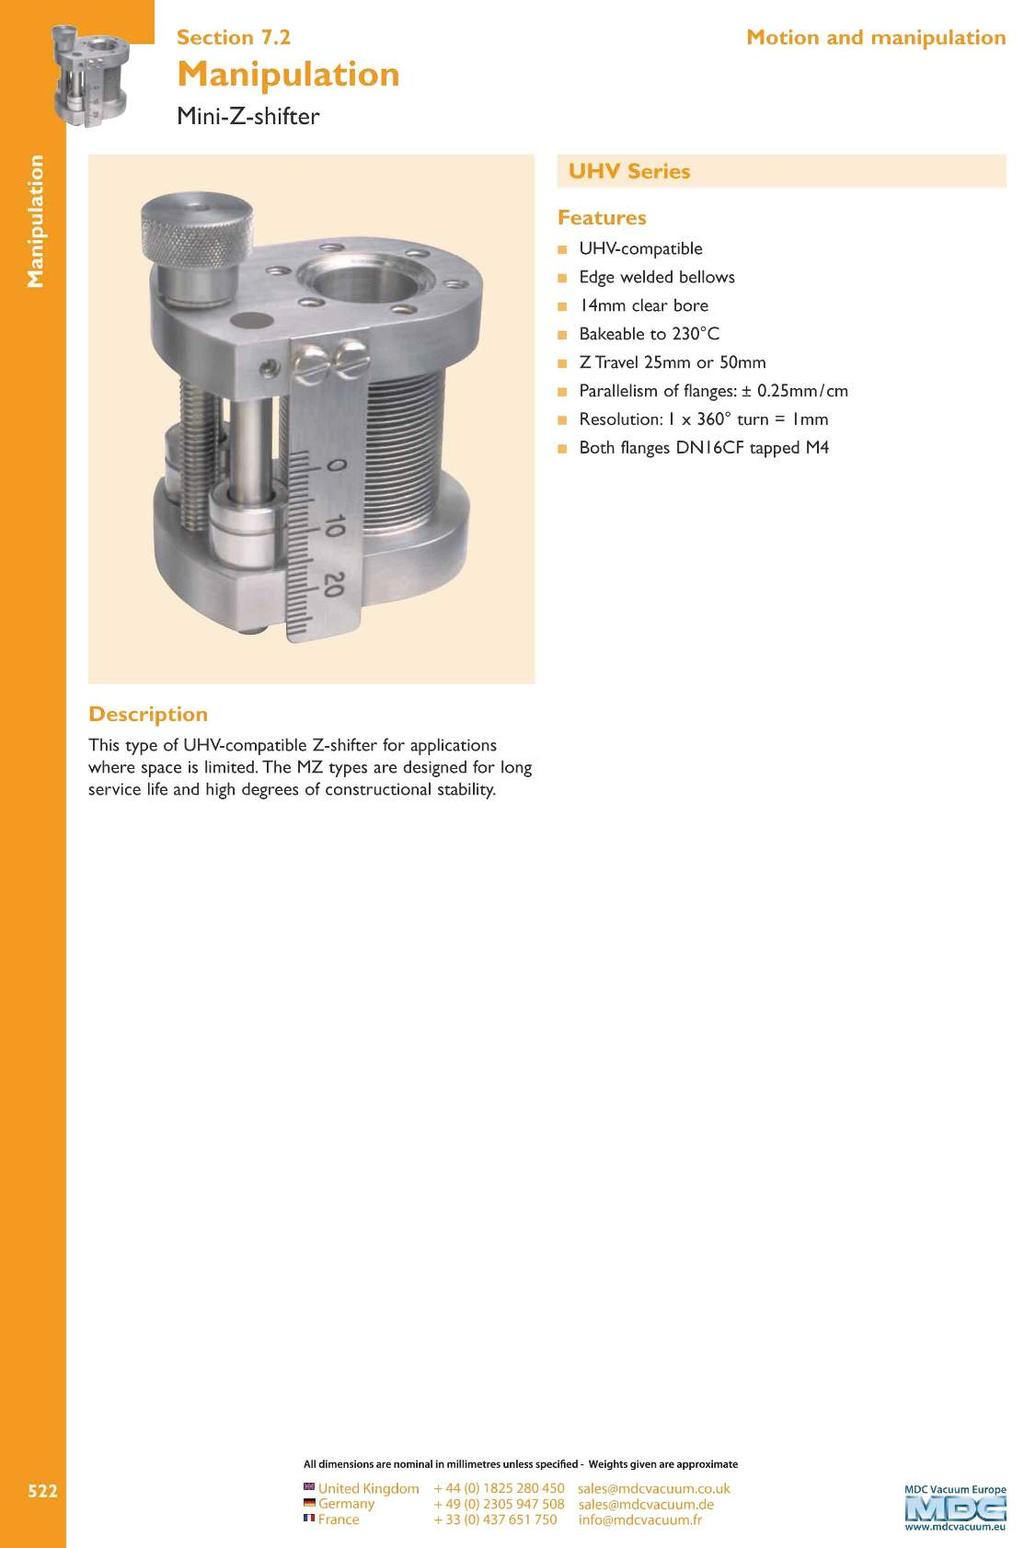 Section 7.2 Manipulation Mini-Z-shifter UHV Series UHY-compatible Edge welded bellows 14mm clear bore Bakeable to 230 C Z Travel 25mm or SOmm Parallelism of flanges:± 0.